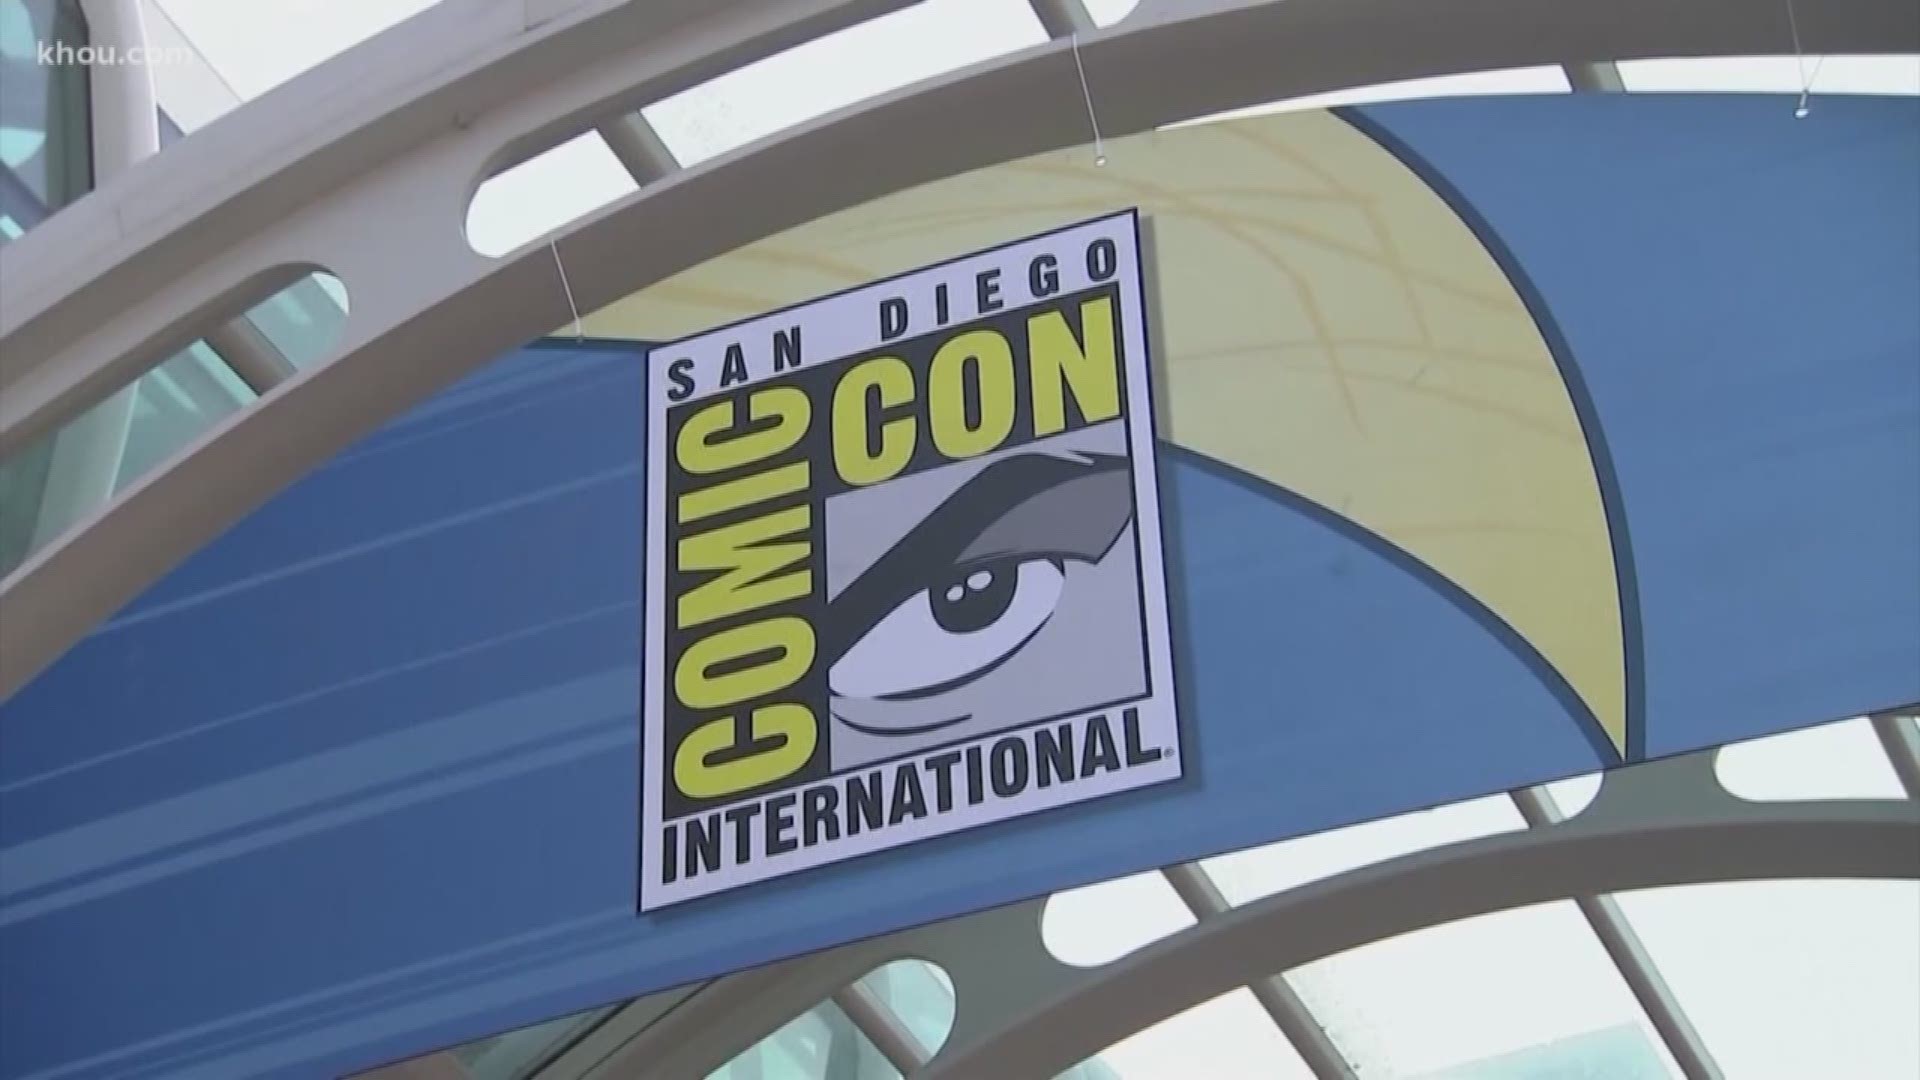 Comic Con gets underway in San Diego today and this event has come a long way. It started 50 years ago in the basement of a hotel. These days huge stars and studios come out to delight fans. So what headlines can we expect this year?